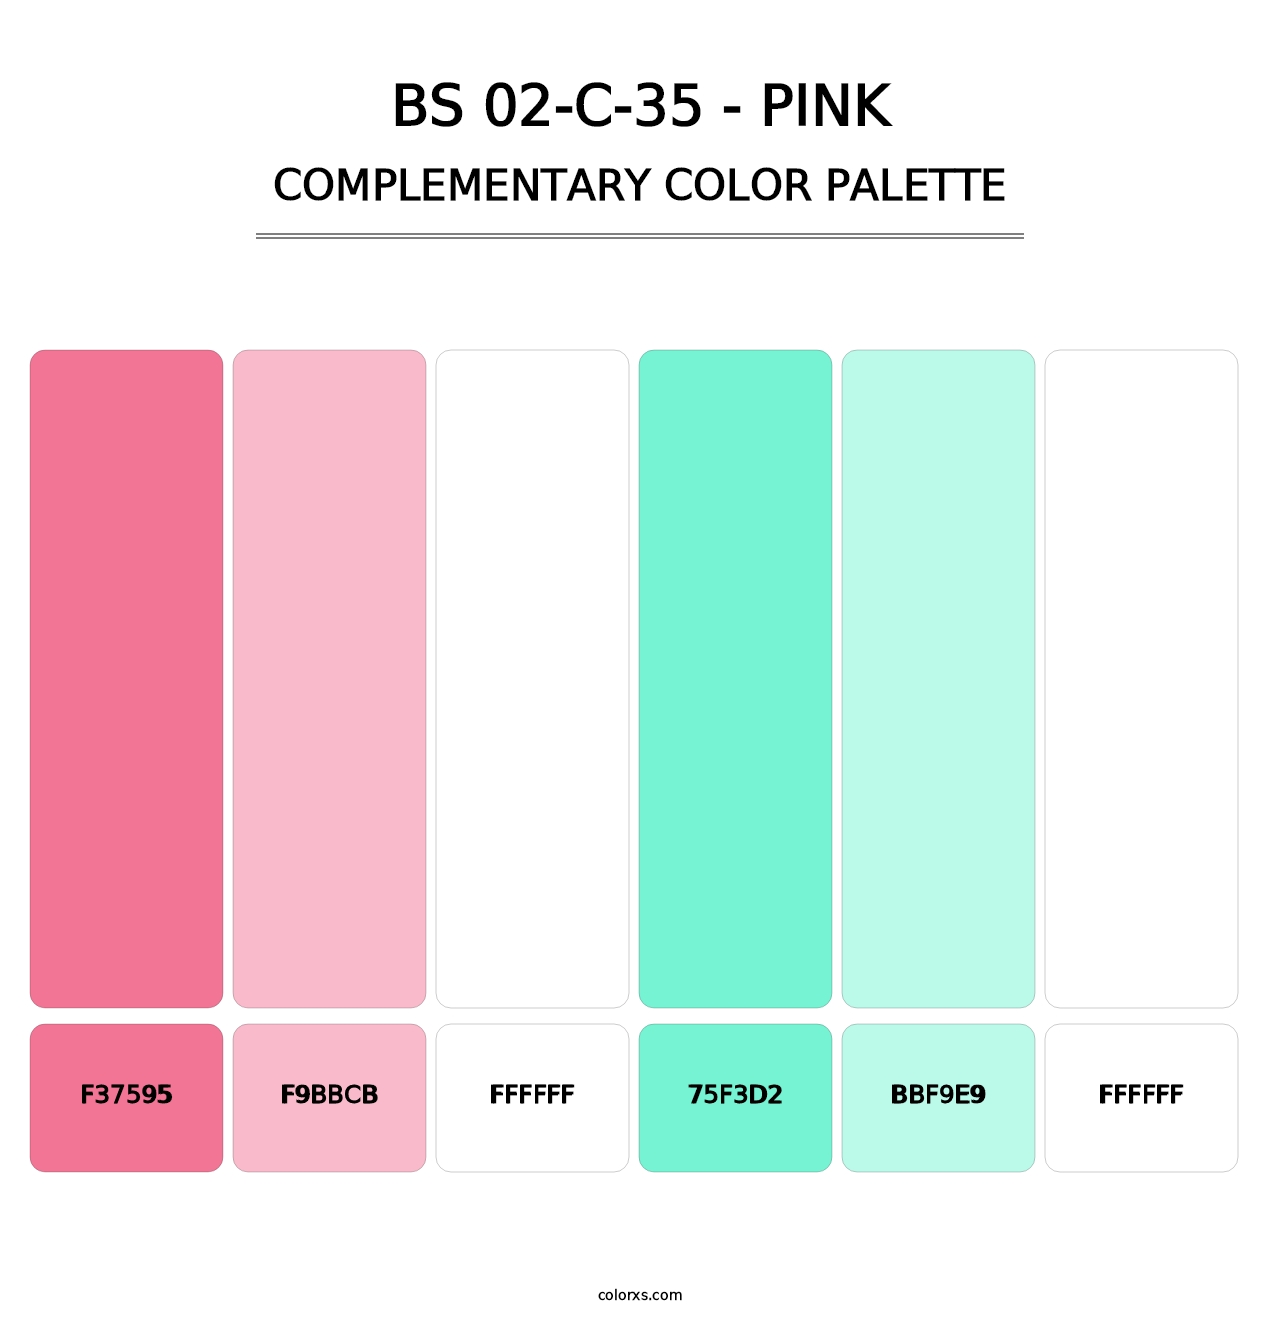 BS 02-C-35 - Pink - Complementary Color Palette